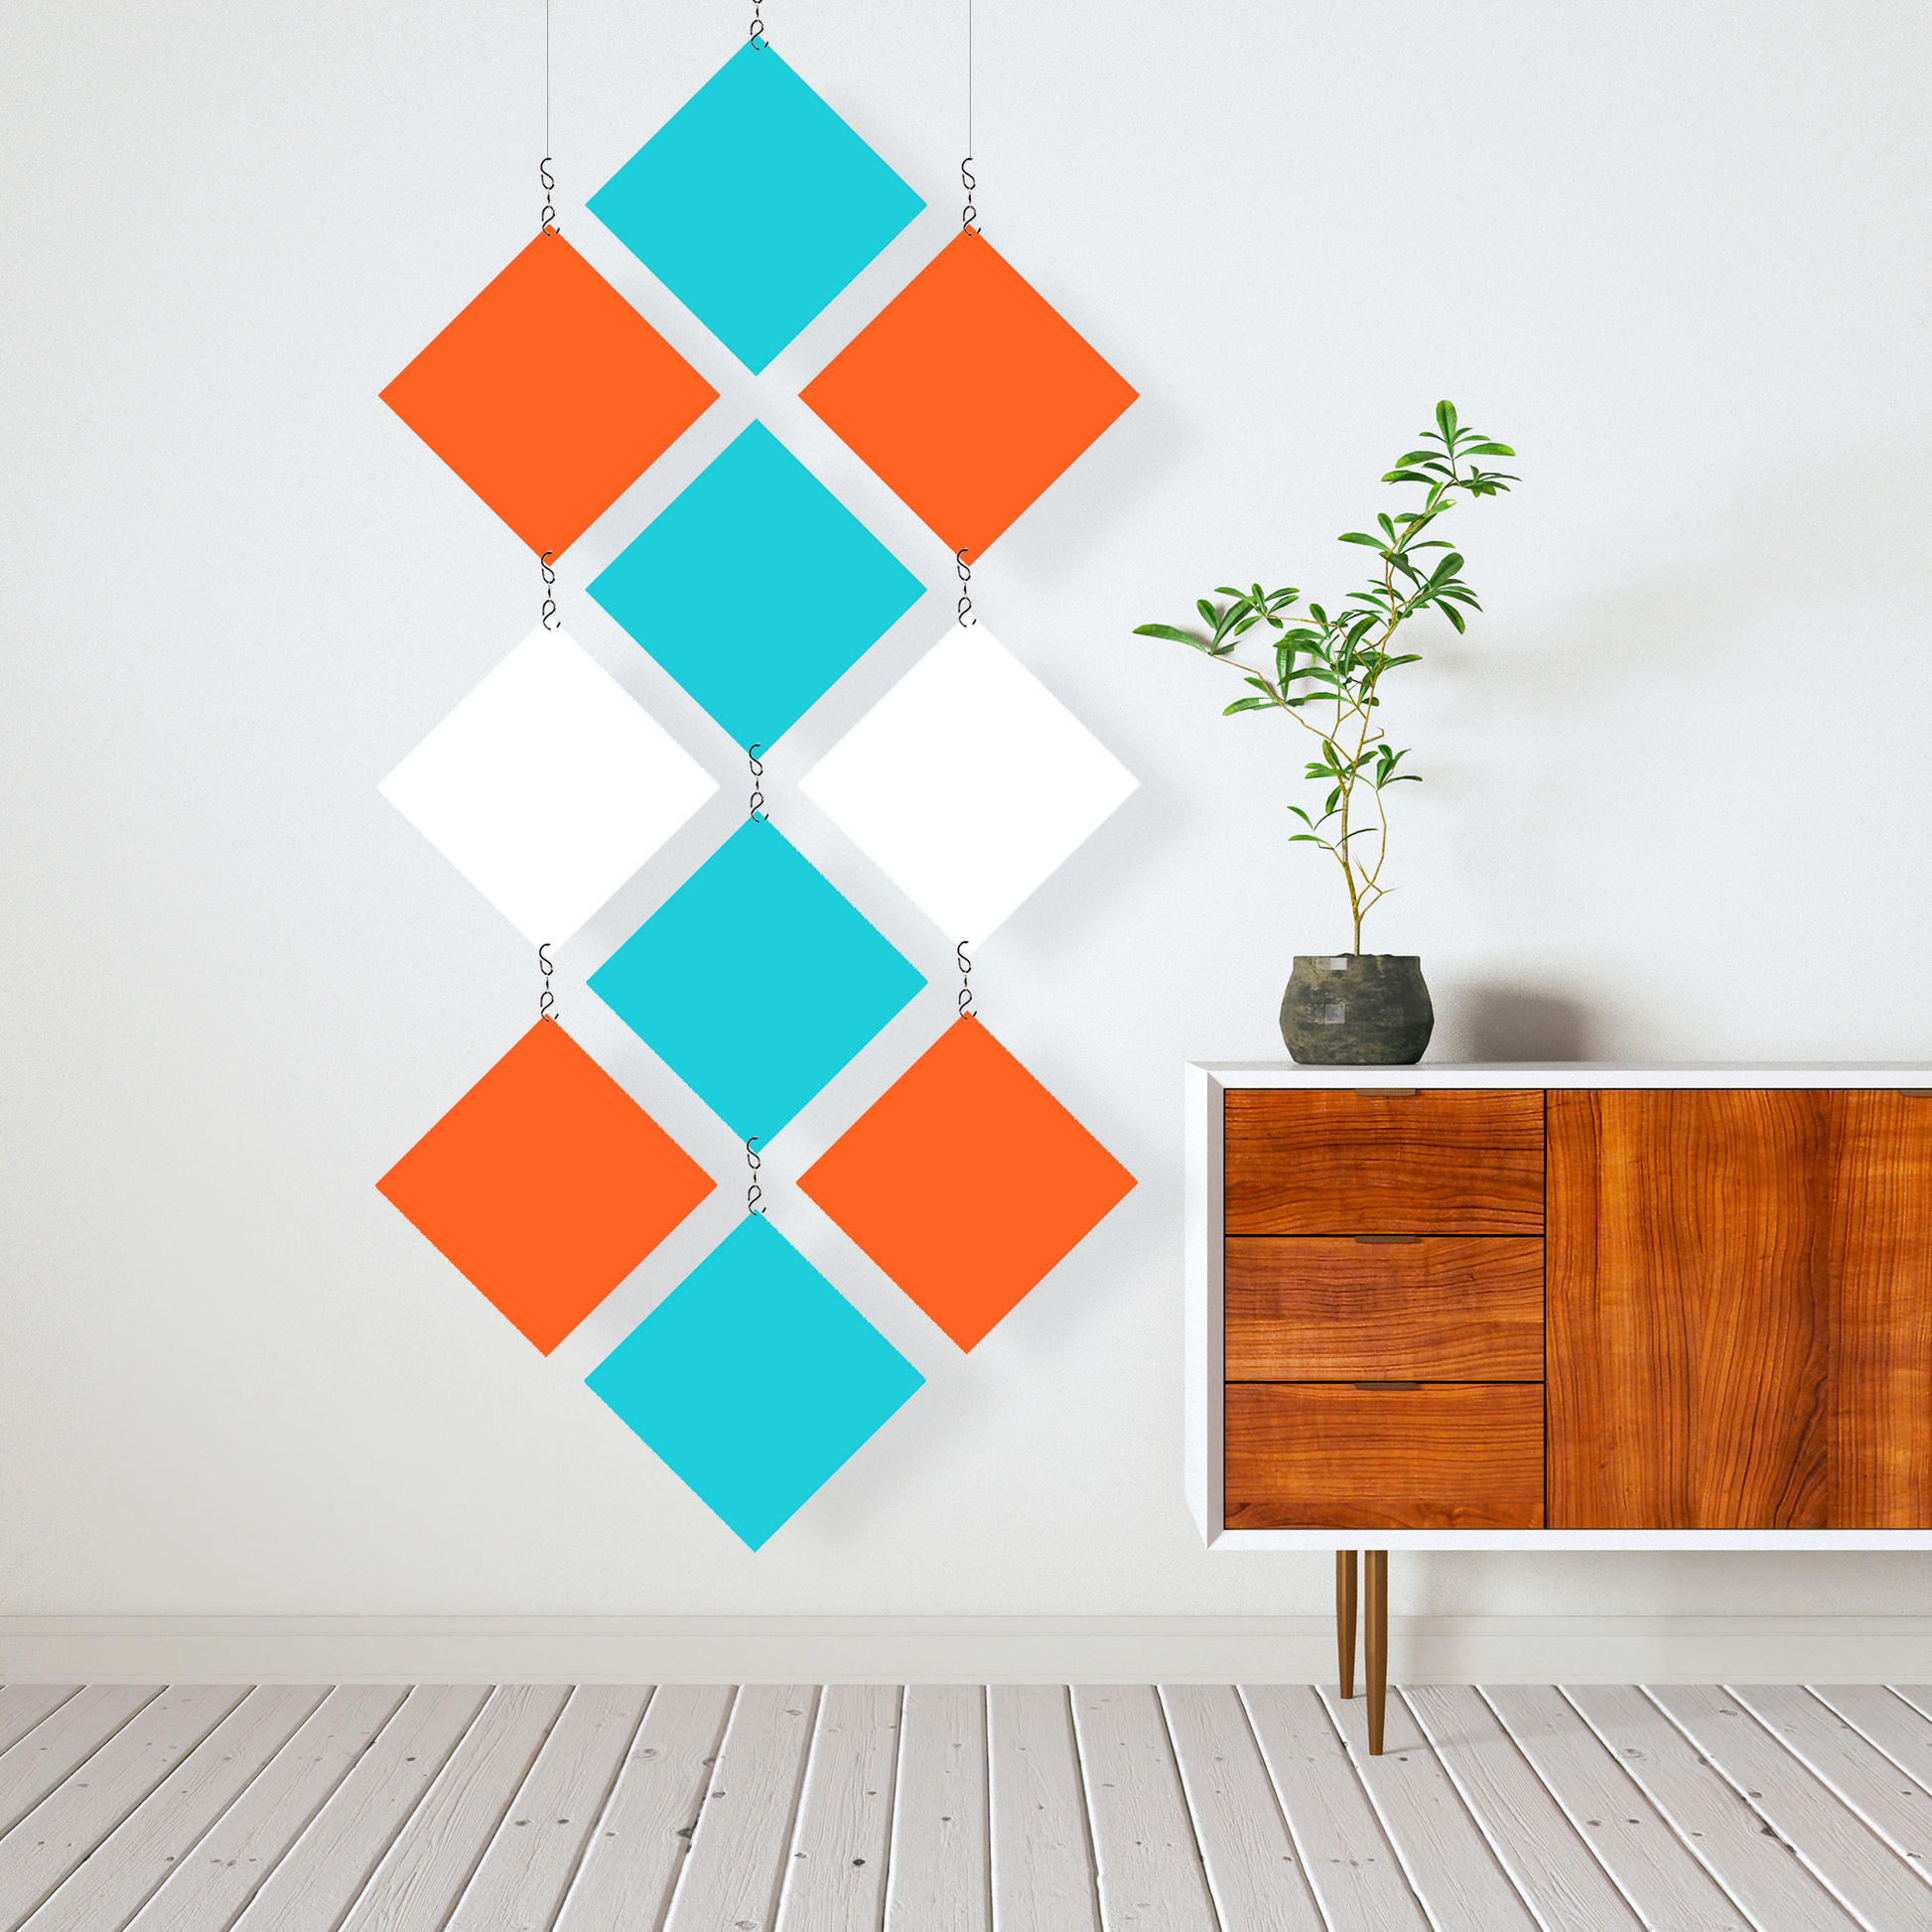 Mid Century Modern Hanging Kinetic Room Divider and Mobile in Orange, Aqua, and White  next to modern wood credenze sideboard with plant in white room - MODcast colorful room divider mobiles by AtomicMobiles.com